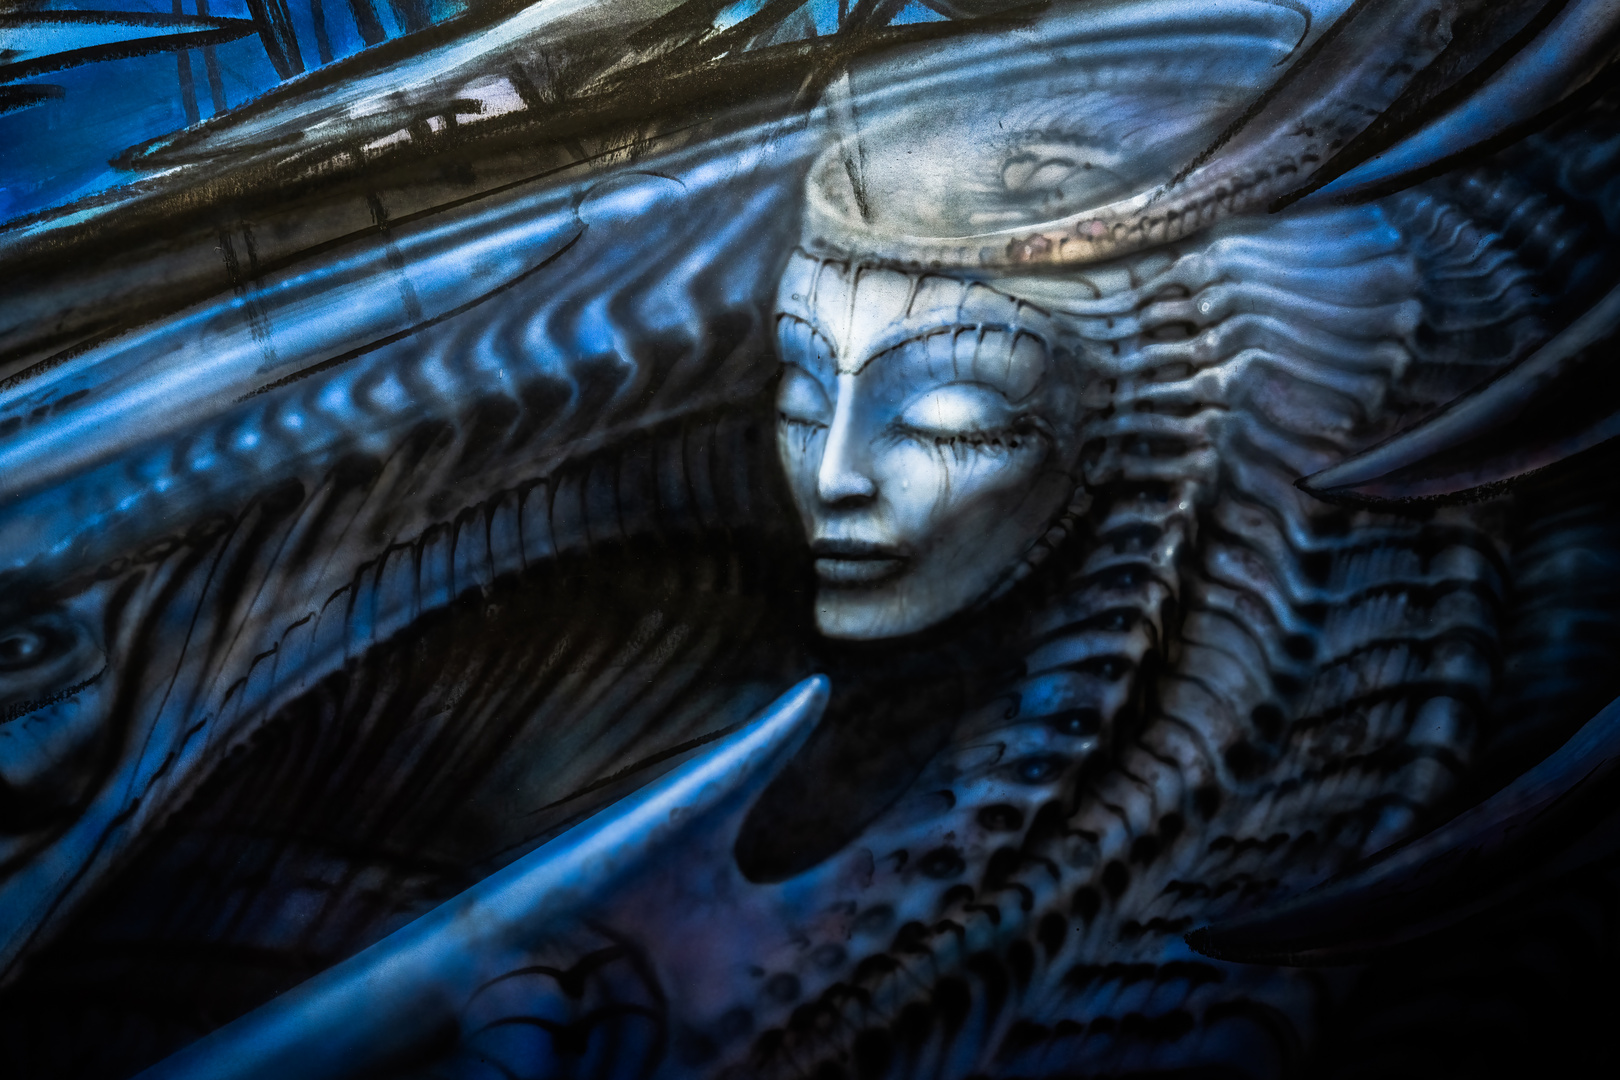 Blue Monday by HR Giger